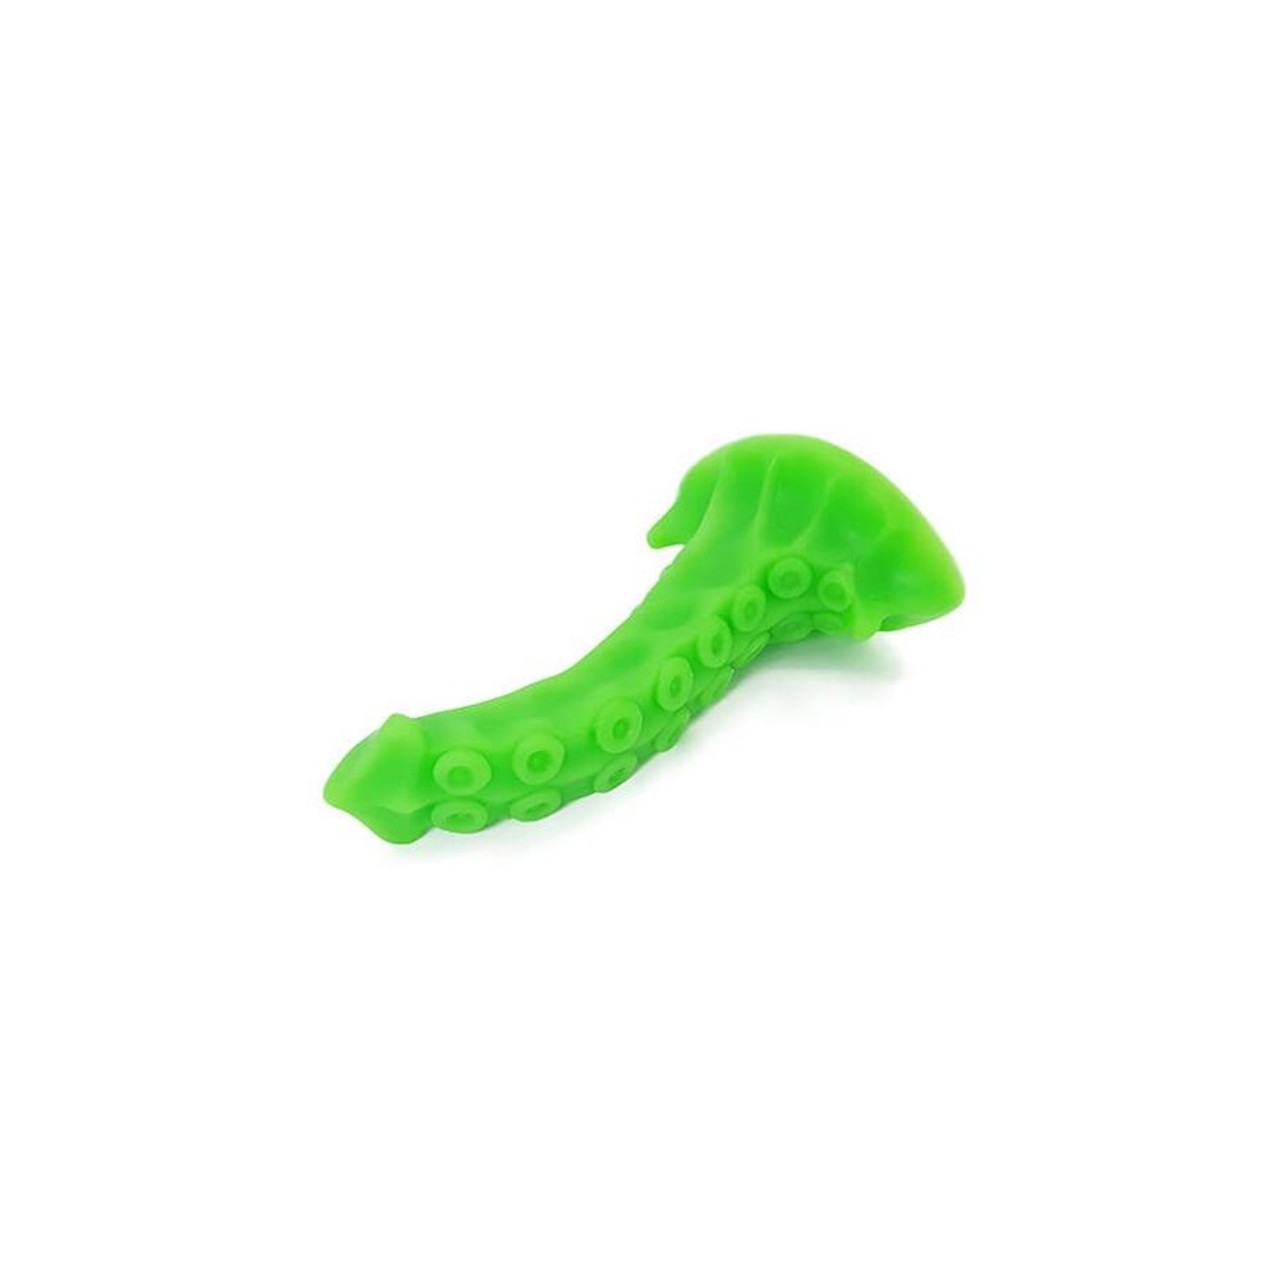 For the human who wants to bang like an extraterrestrial 
Uberrime Xenuphota Alien Tentacle Silicone Dildo, $69
Spectrum Boutique, 0nline only, spectrumboutique.com 
We cum in peace? This, as you can see, is not your average dildo, and it&#146;s not for an average orifice. The ideal humanoid to take on the textured 6.75-inch Uberrime Xenuphota Alien Tentacle Dildo is for those who might fancy a cephalopod or who has watched Aliens a wee too many times. It&#146;s described as having some &#147;squish,&#148; but hard enough to maintain some vigorous probing. 
Photo via  spectrumboutique.com